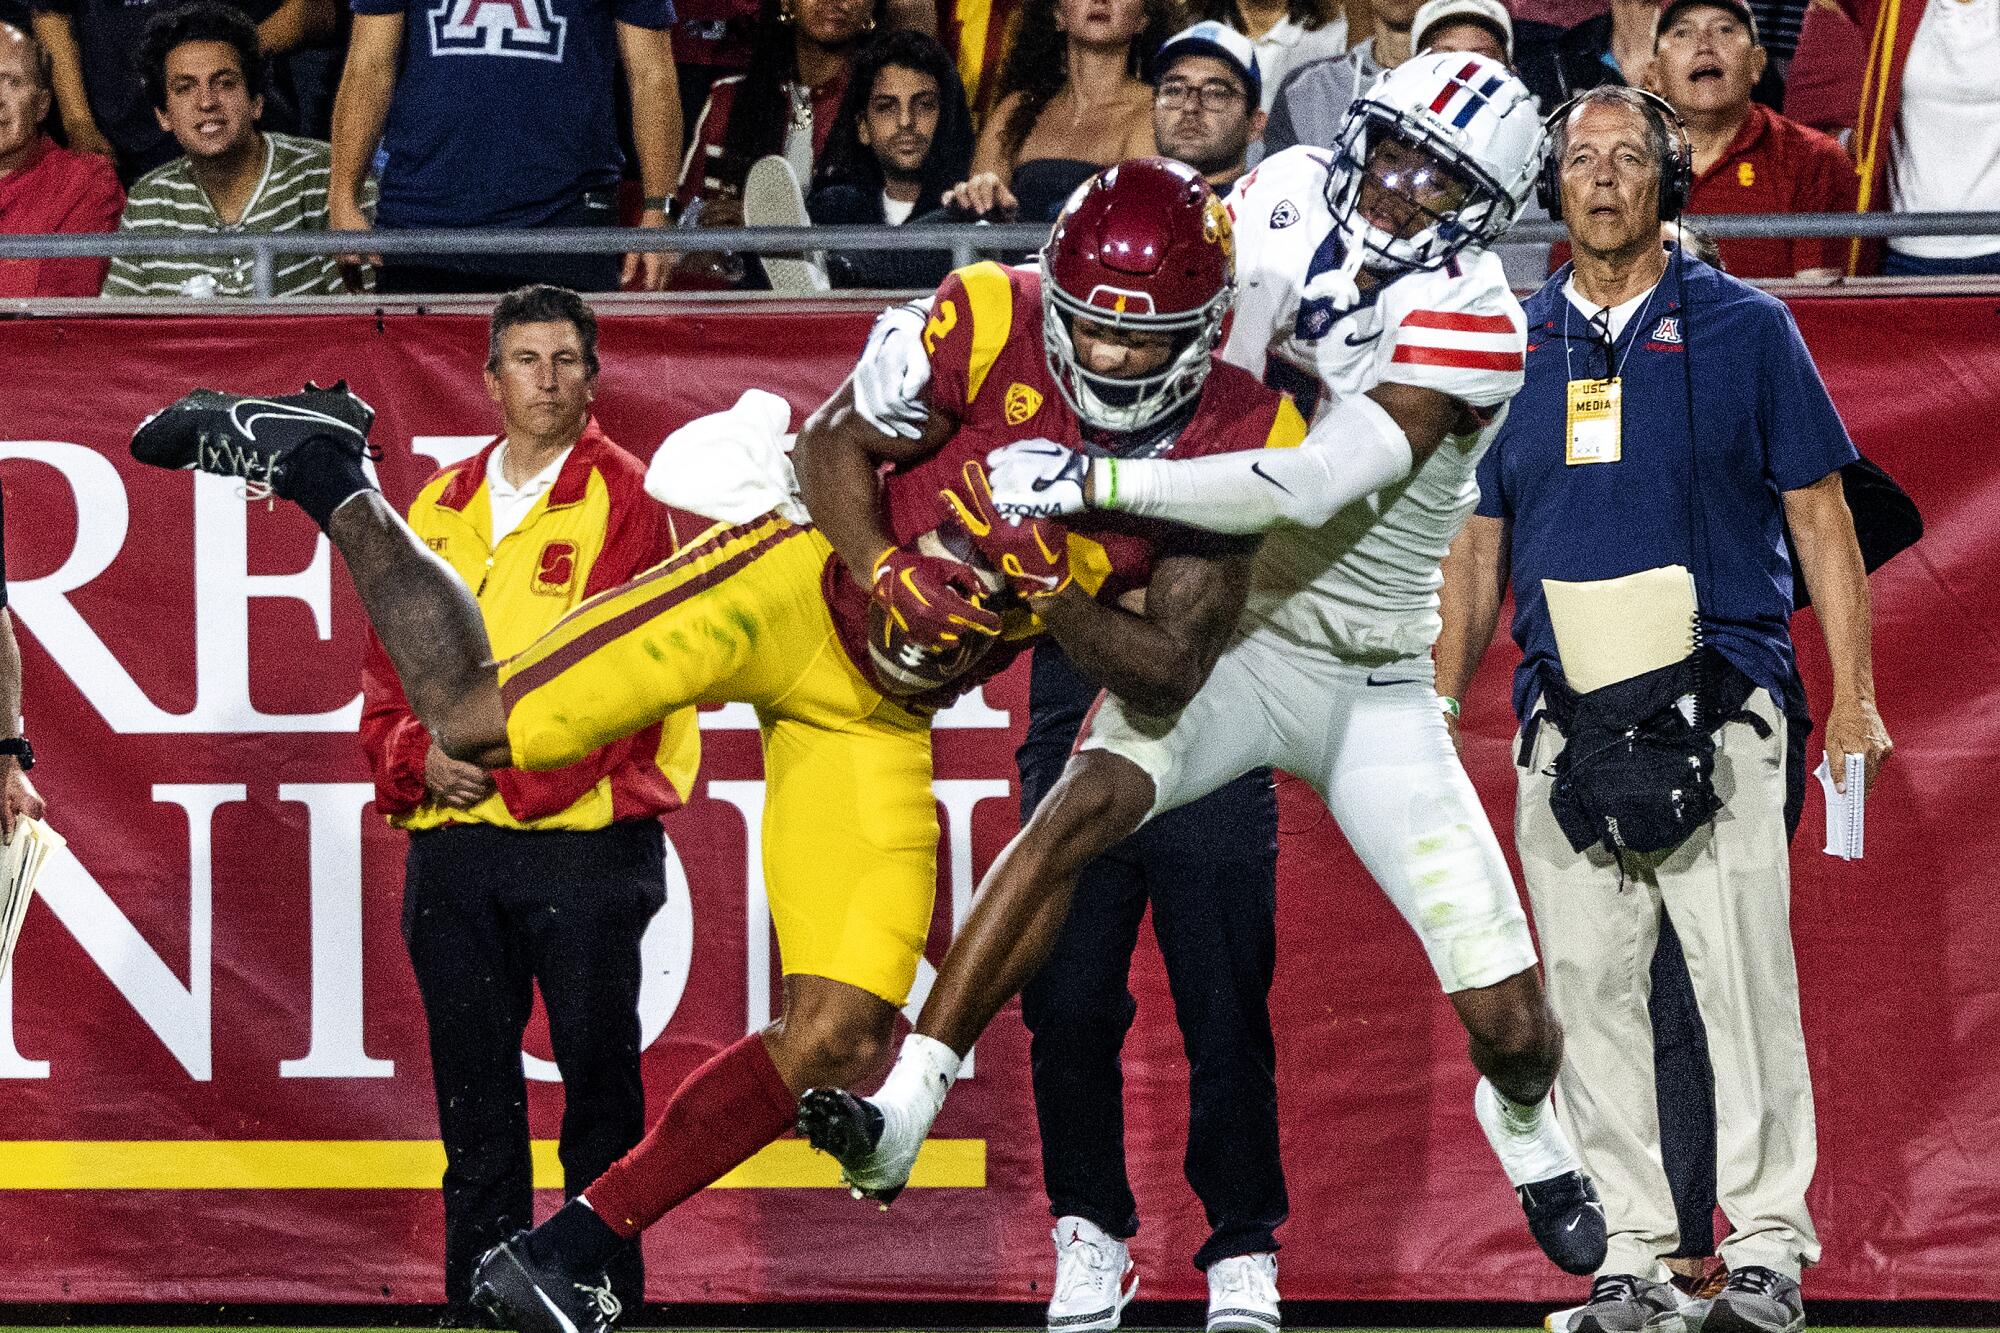 USC wide receiver Brenden Rice catches a pass in front of Arizona cornerback Ephesians Prysock.